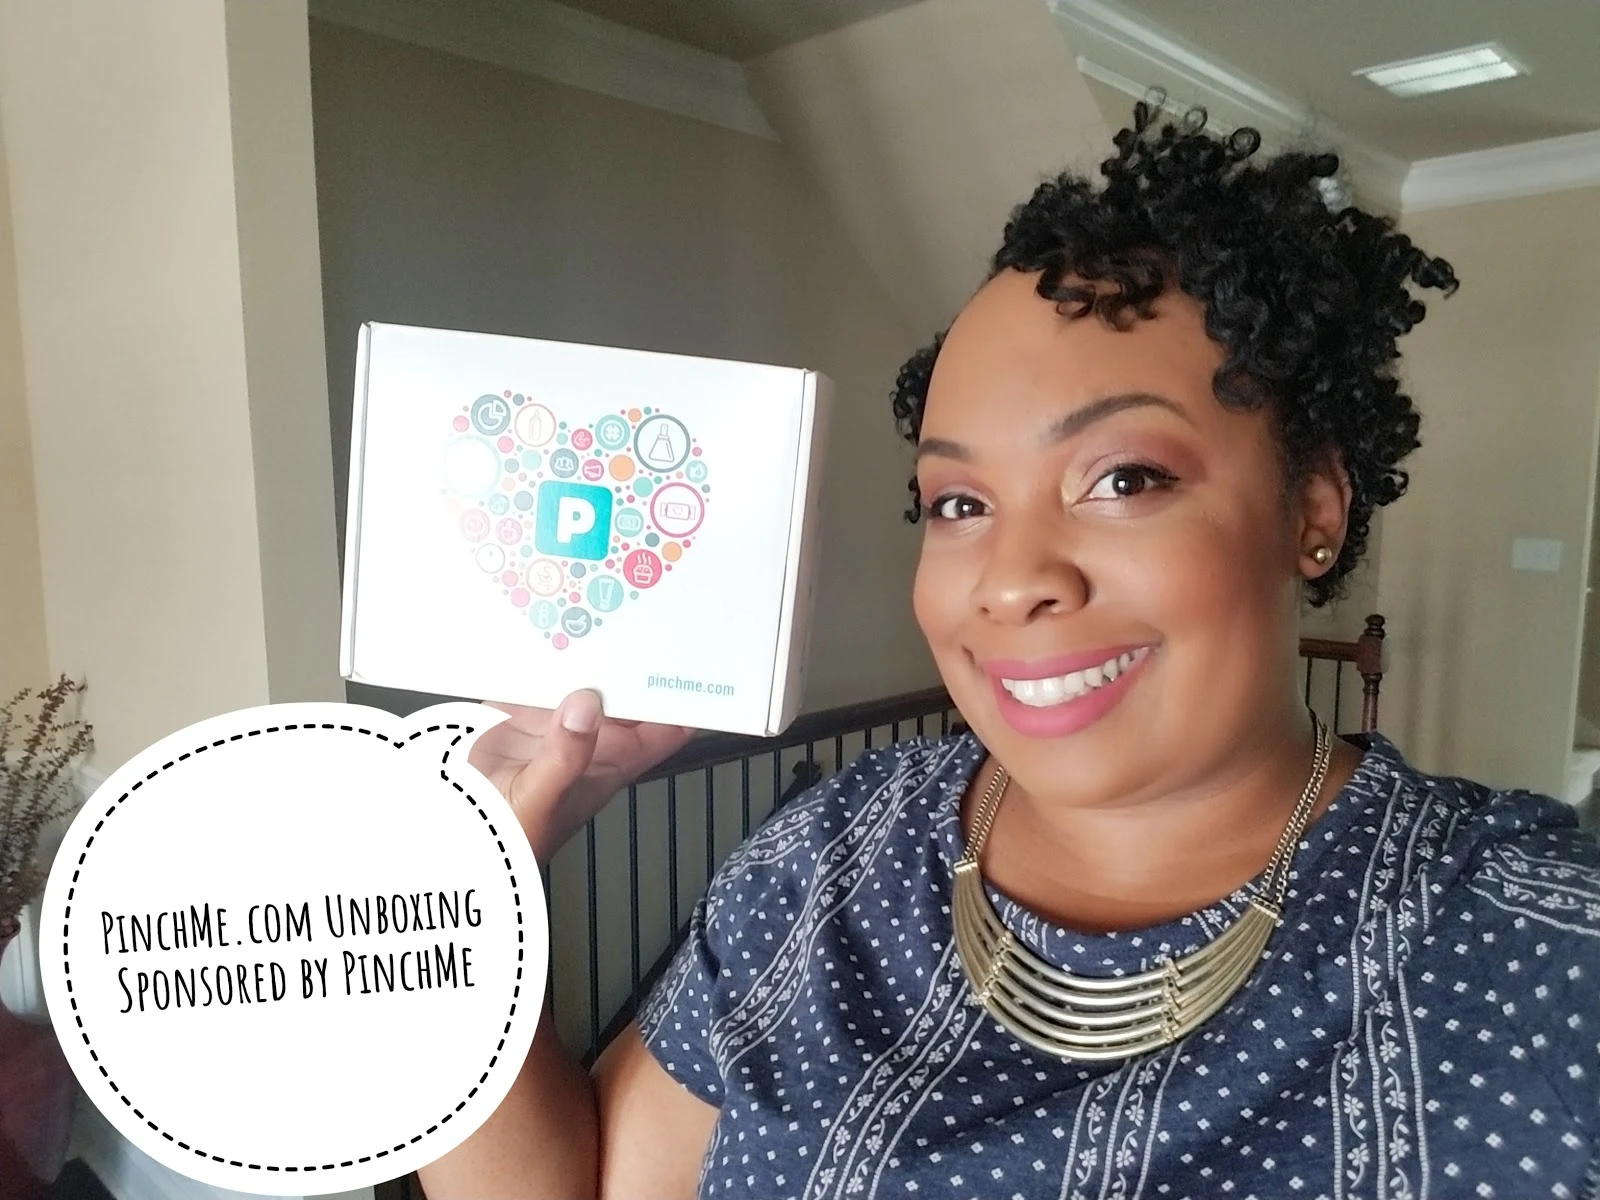 Get Free Samples in the Mail Free: My PINCHme Unboxing Video